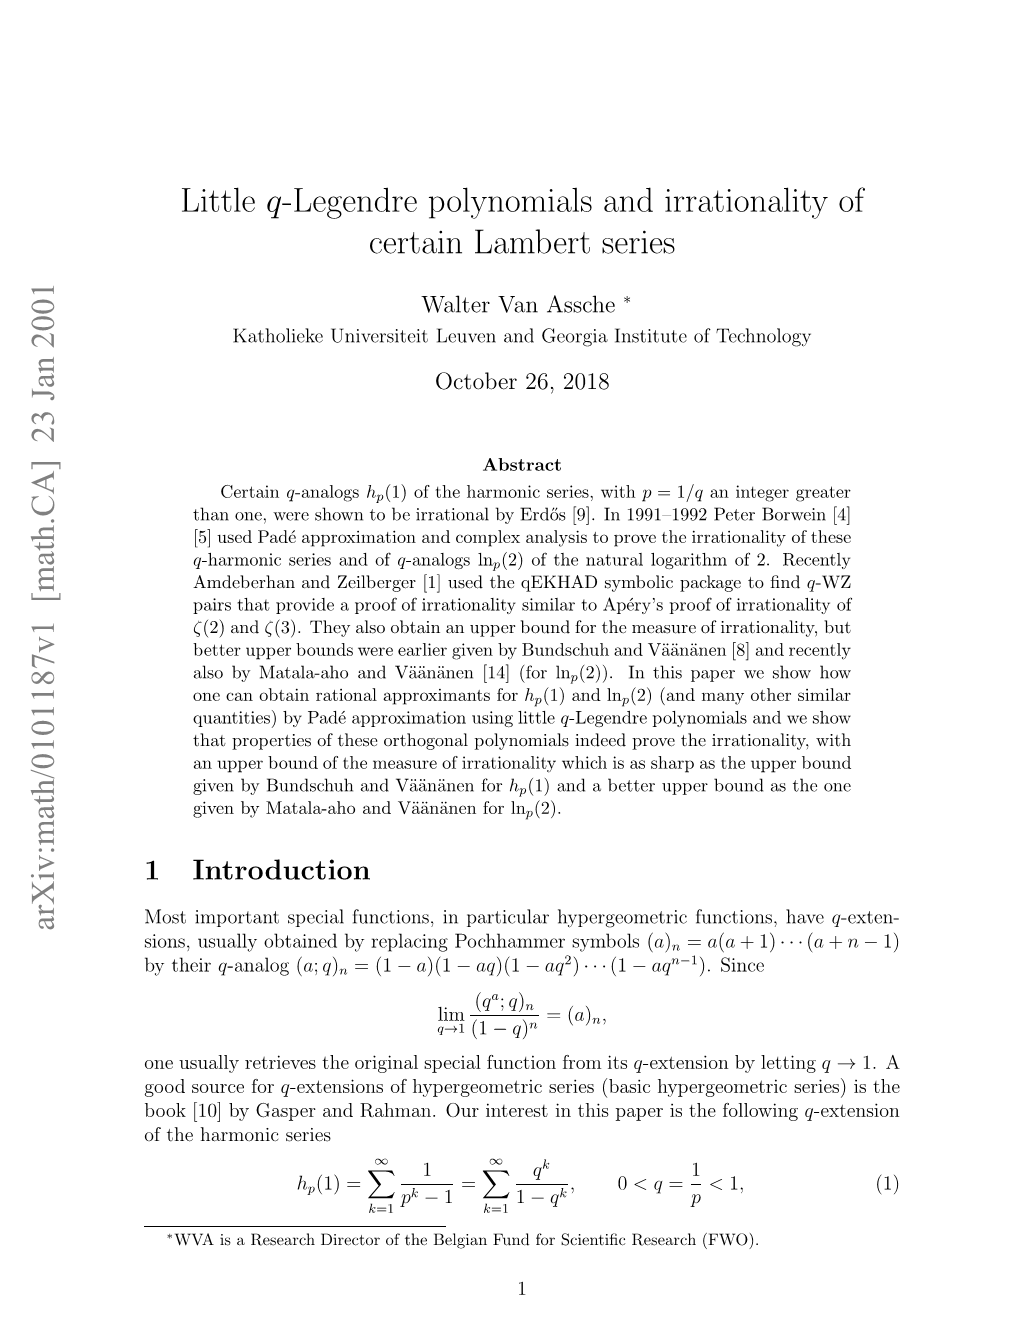 Little Q-Legendre Polynomials and Irrationality of Certain Lambert Series